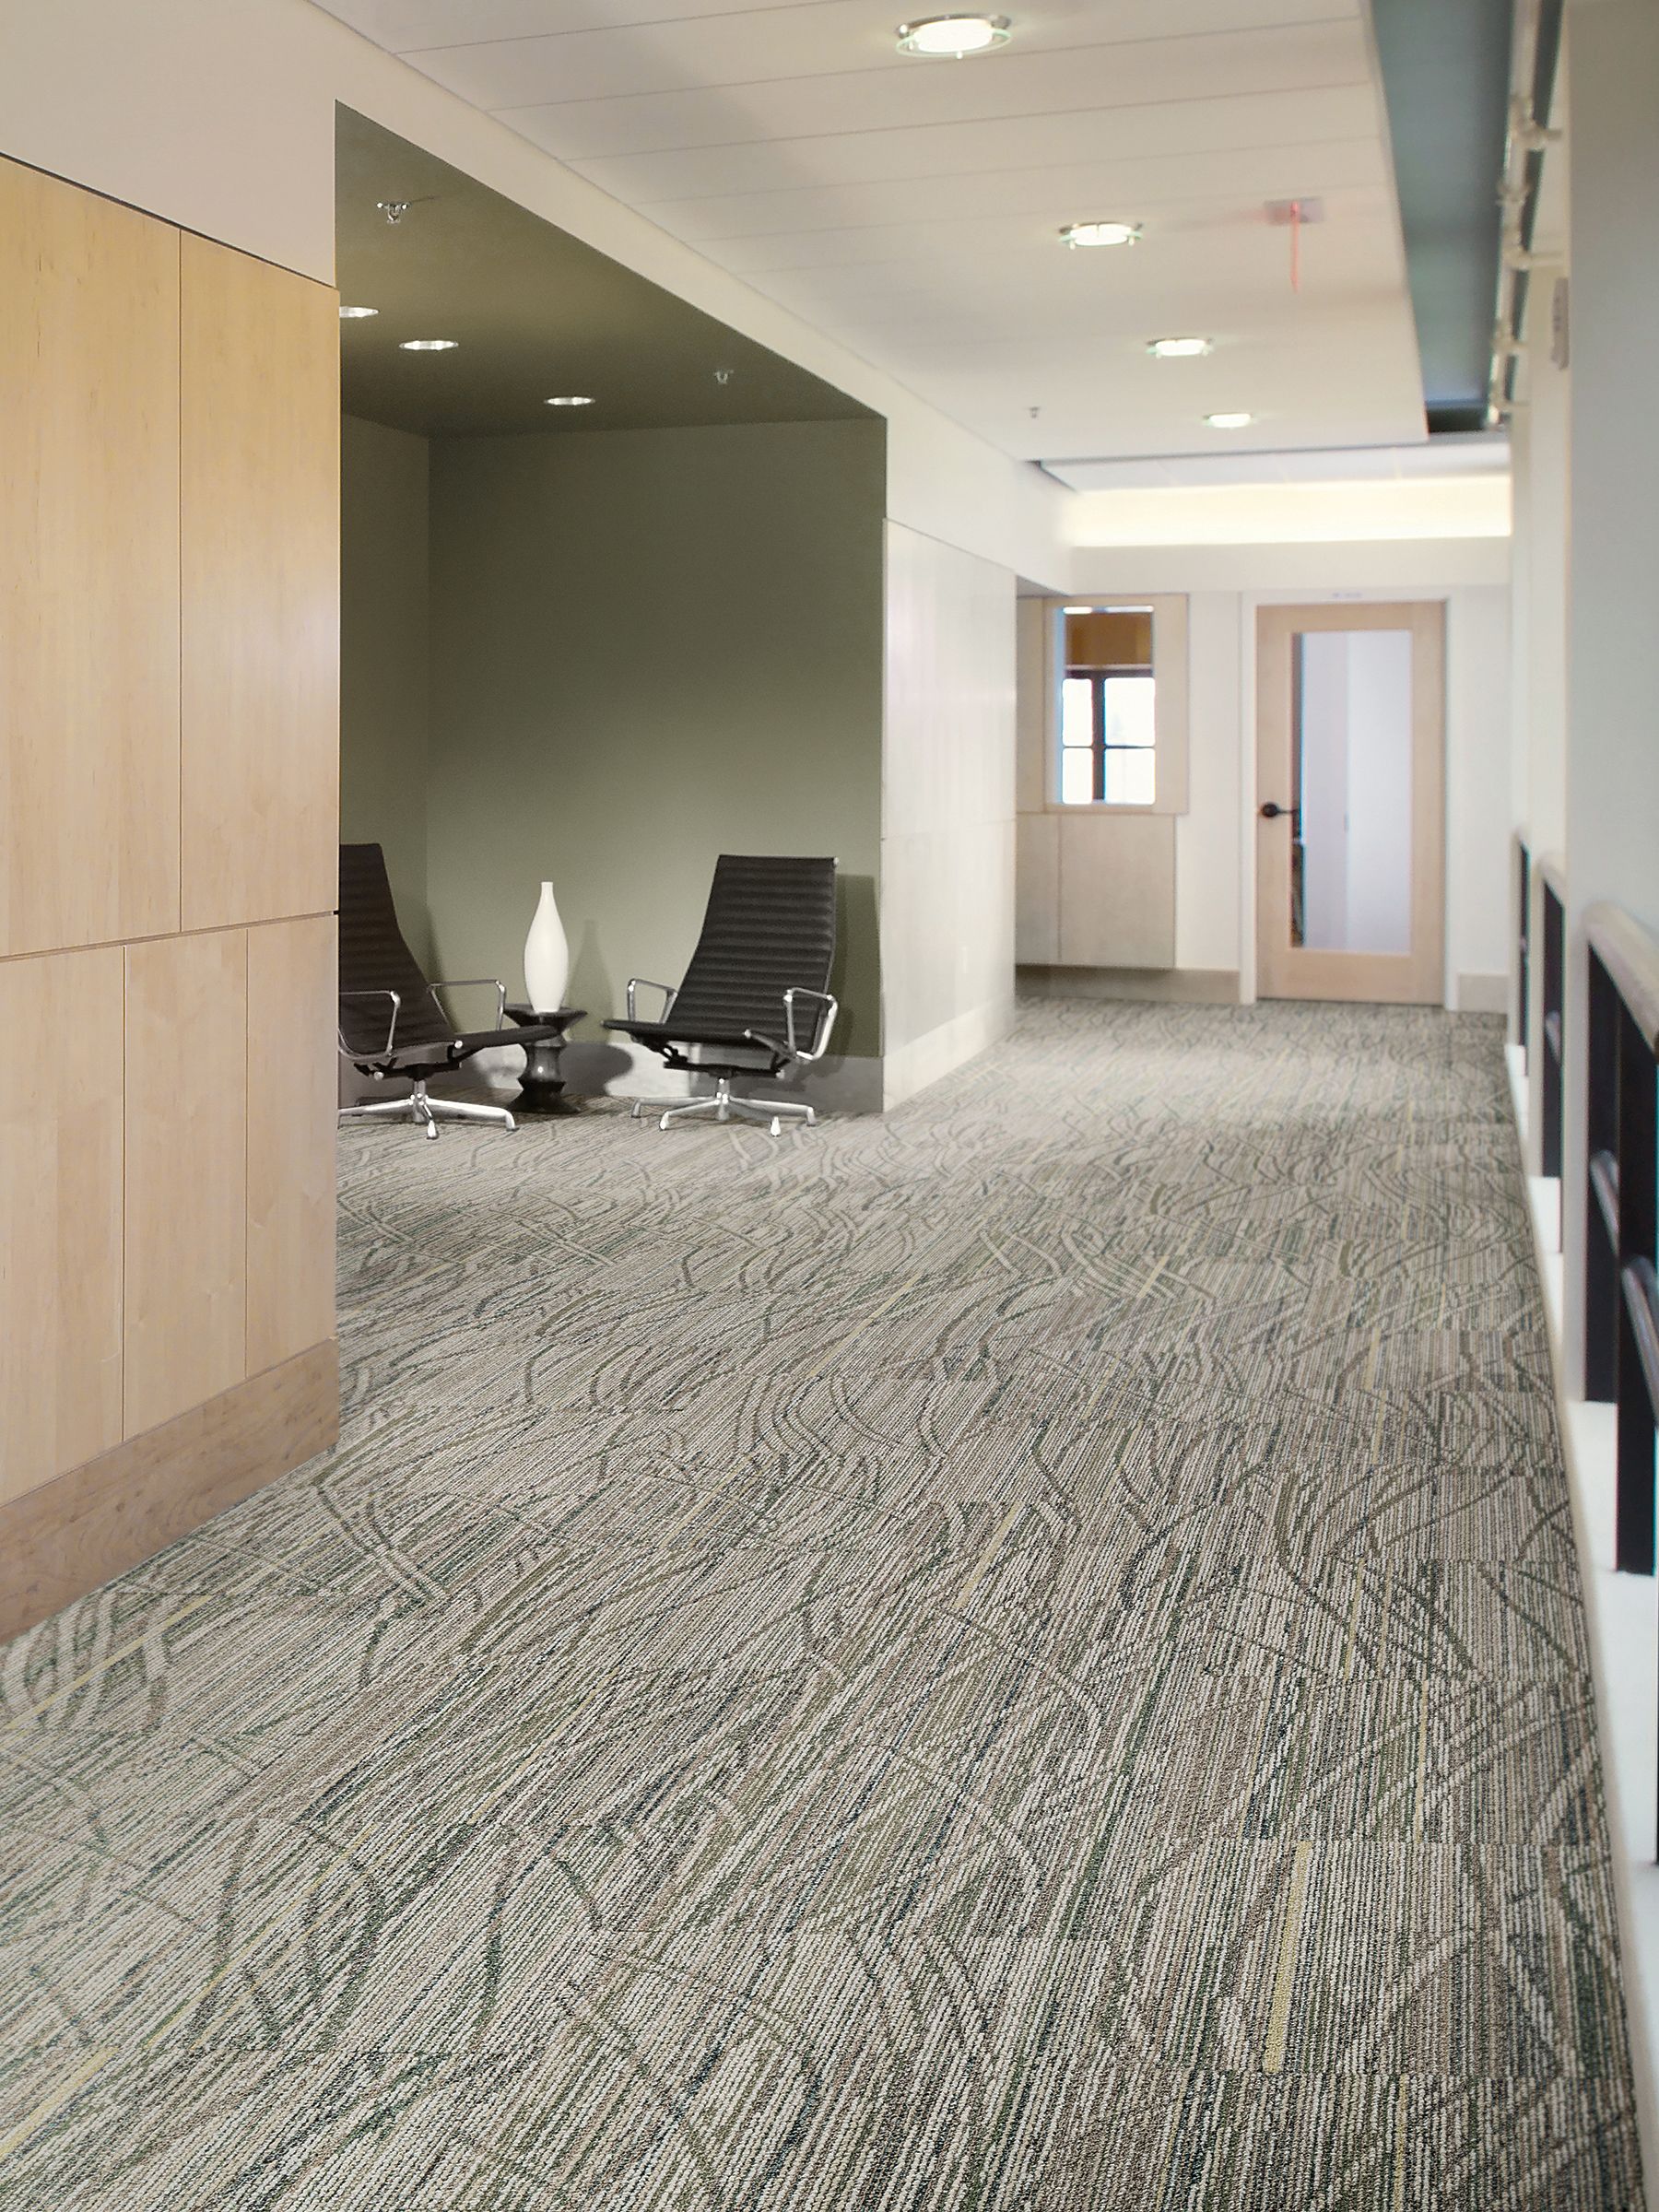 Interface Prairie Grass Loop carpet tile in corridor with seating area on side image number 2